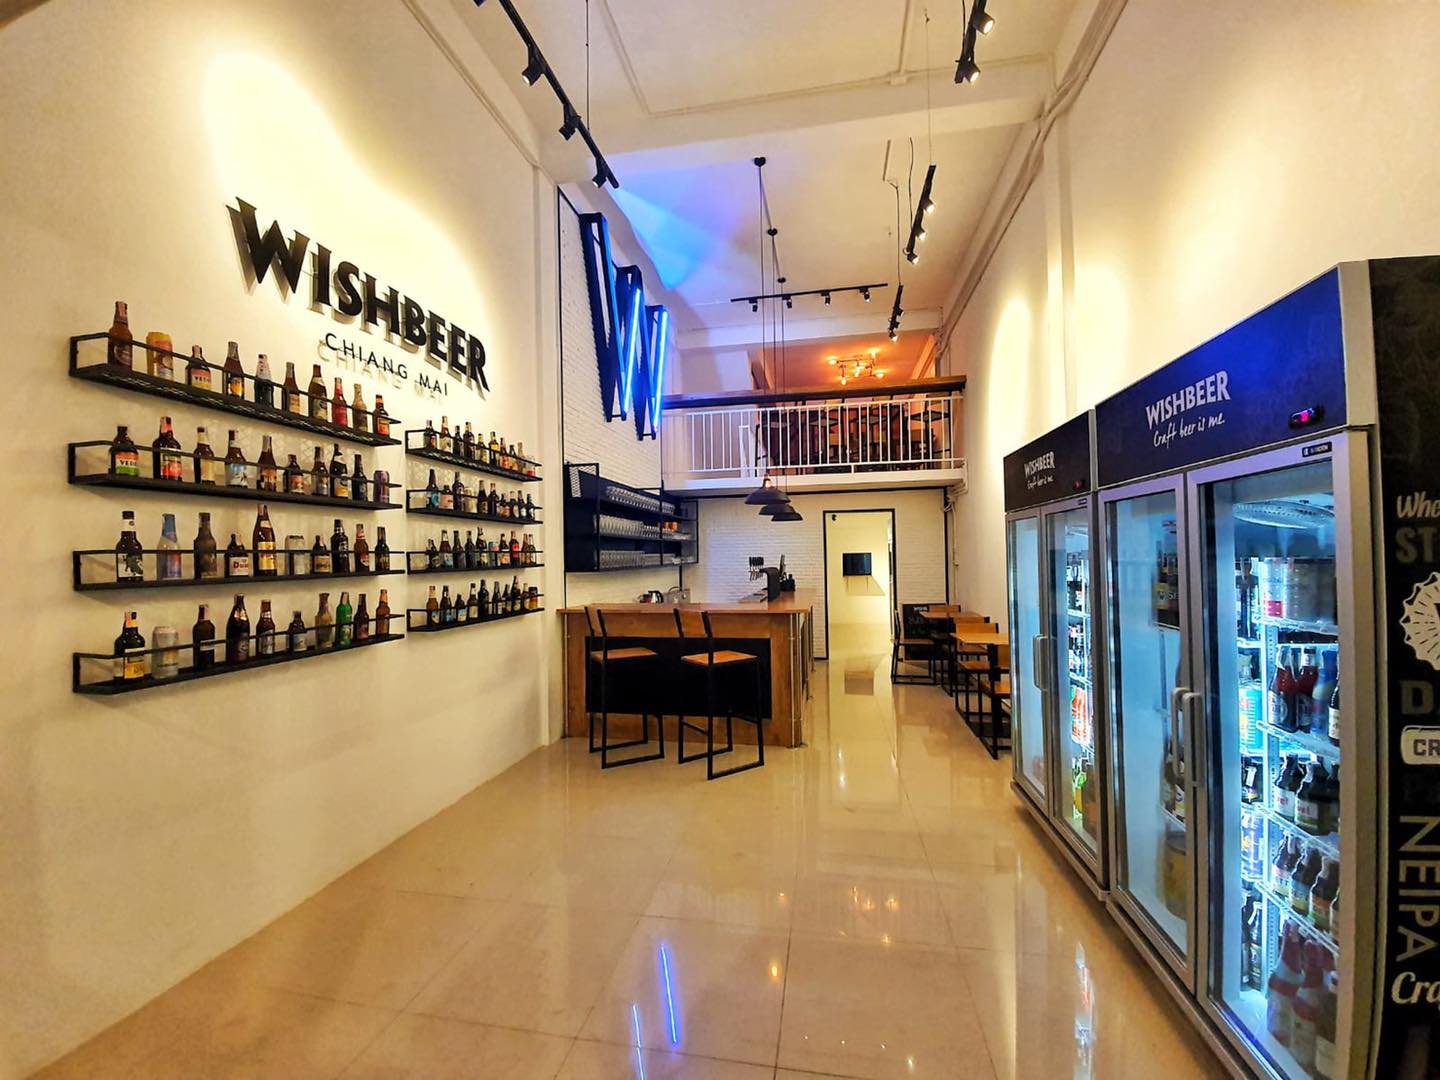 A Wishbeer branch in Chiang Mai. Photo: Wishbeer / Courtesy